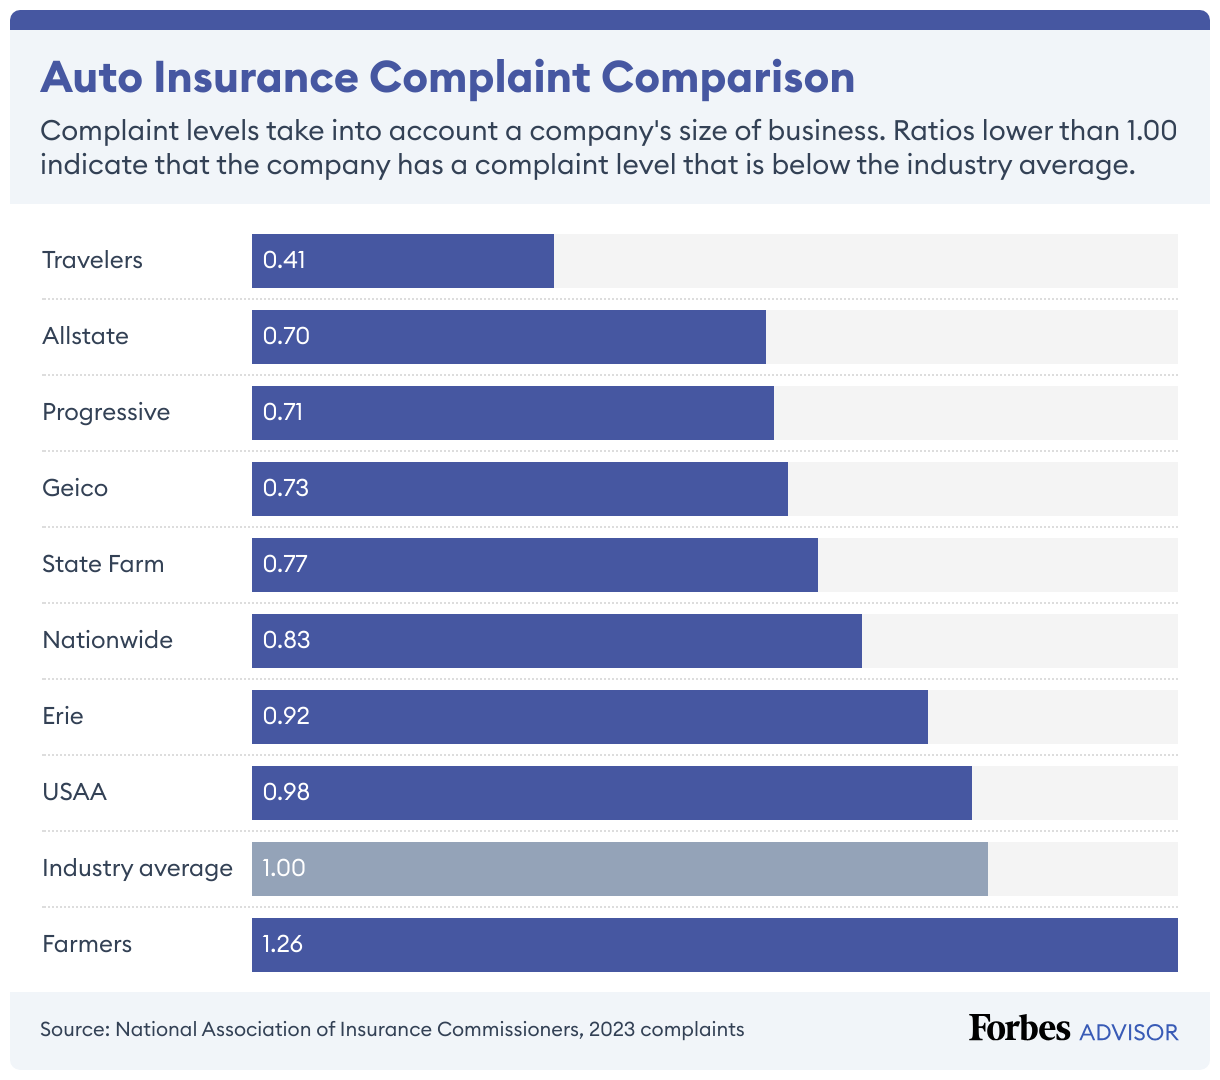 Auto-Owners has a low level of auto insurance complaints compared to Farmers, Geico and USAA.